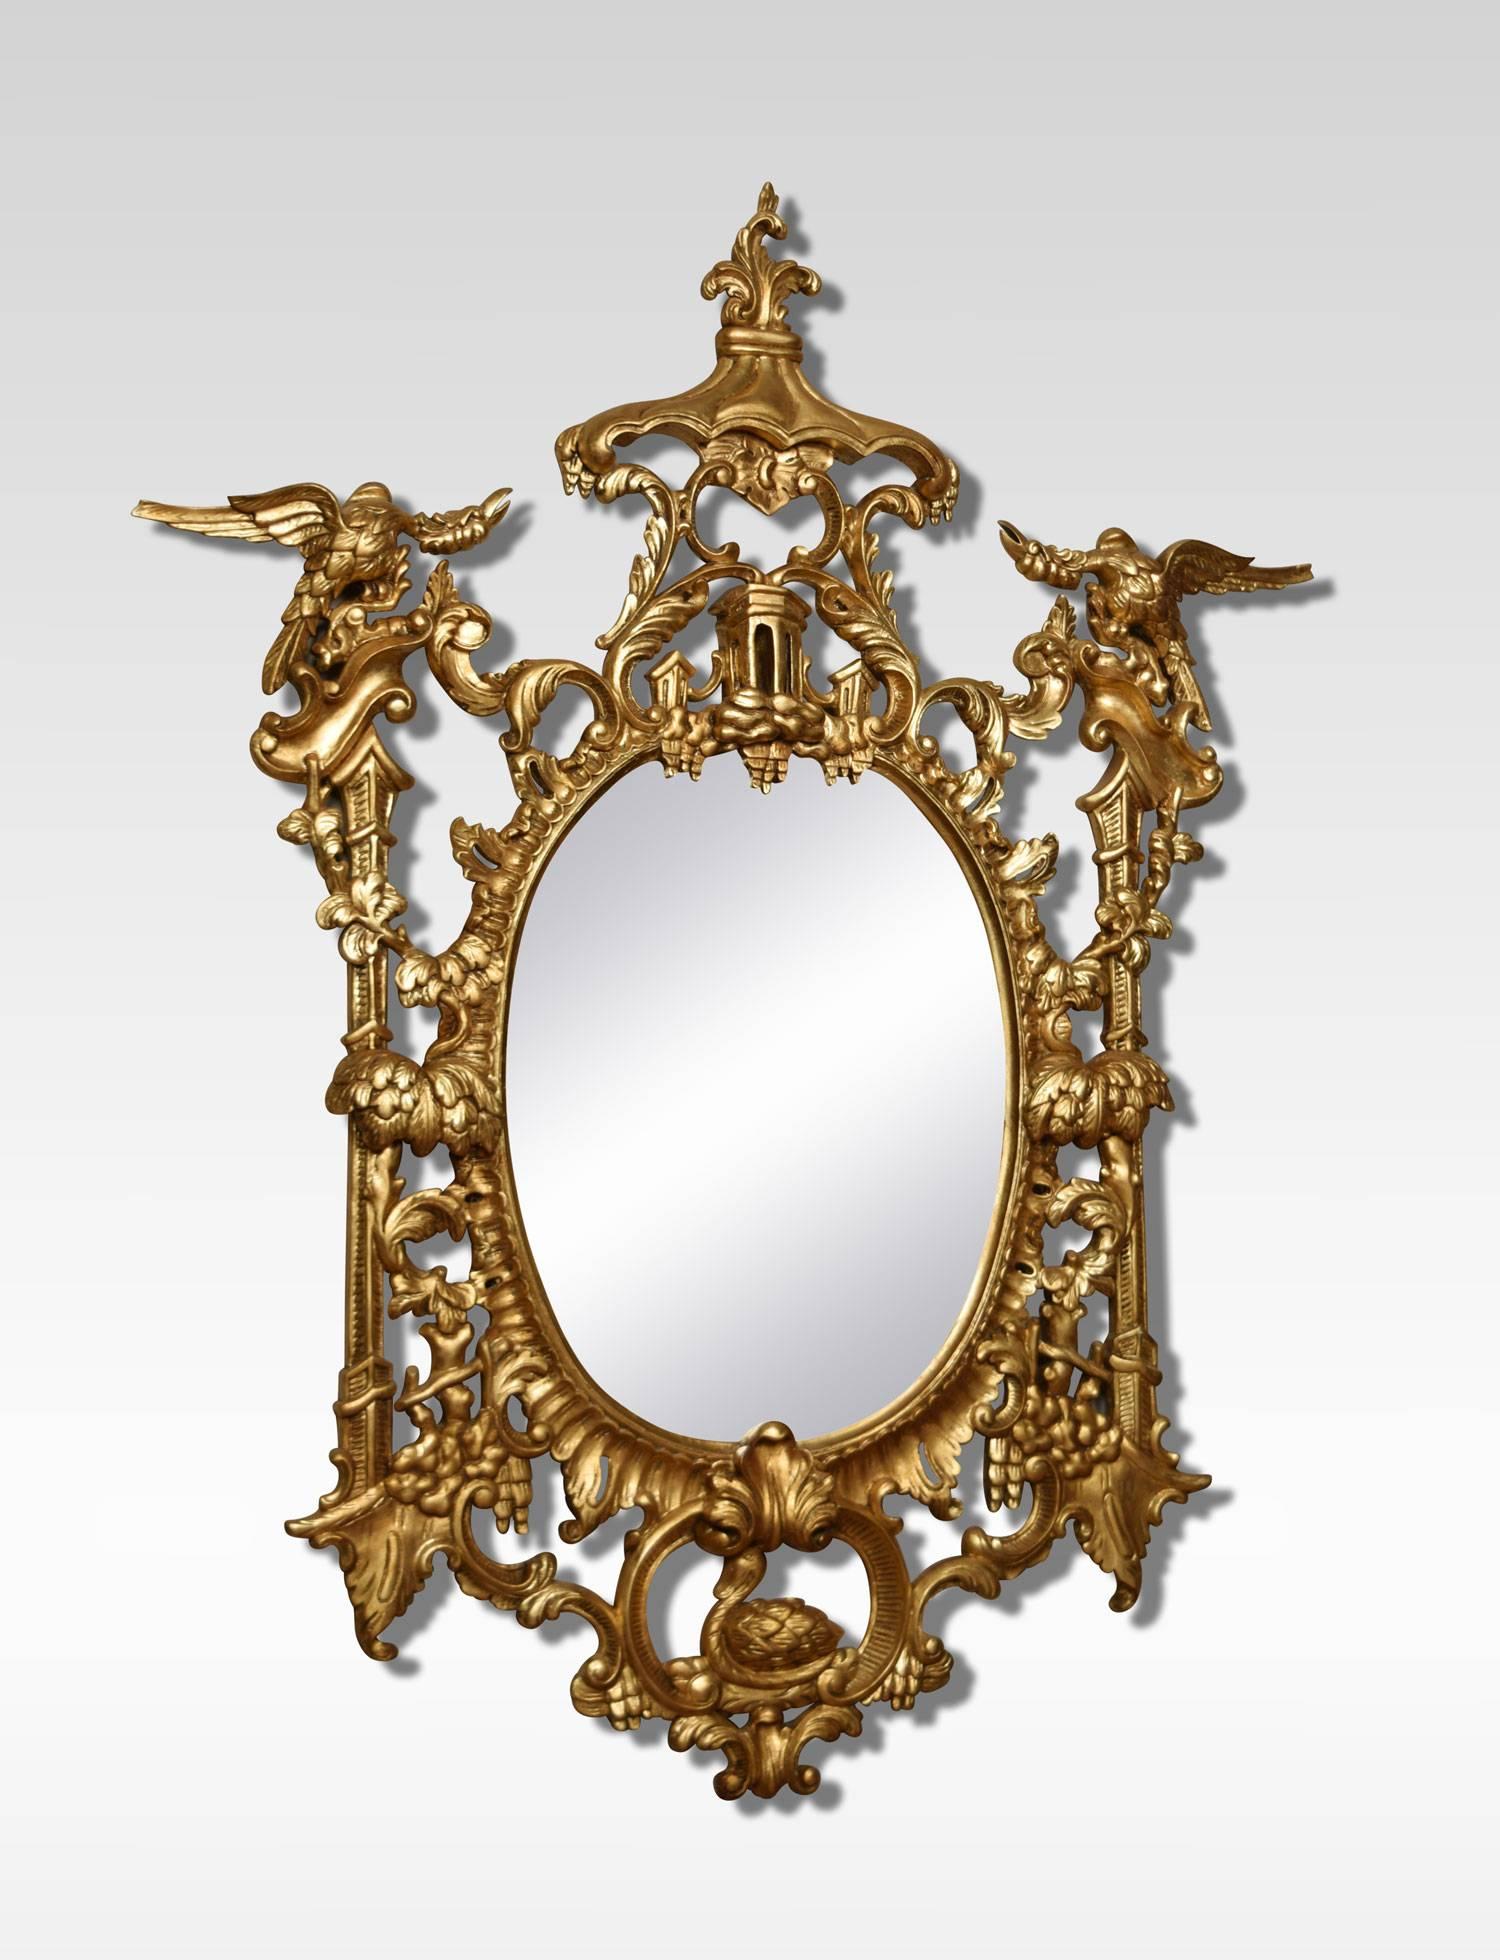 A Pair of Chinese Chippendale style giltwood wall mirrors, the oval plates surrounded by pagoda tops and flanked by griffins.
Dimensions
Height 61.5 inches
Width 47 inches
Depth 3 inches.